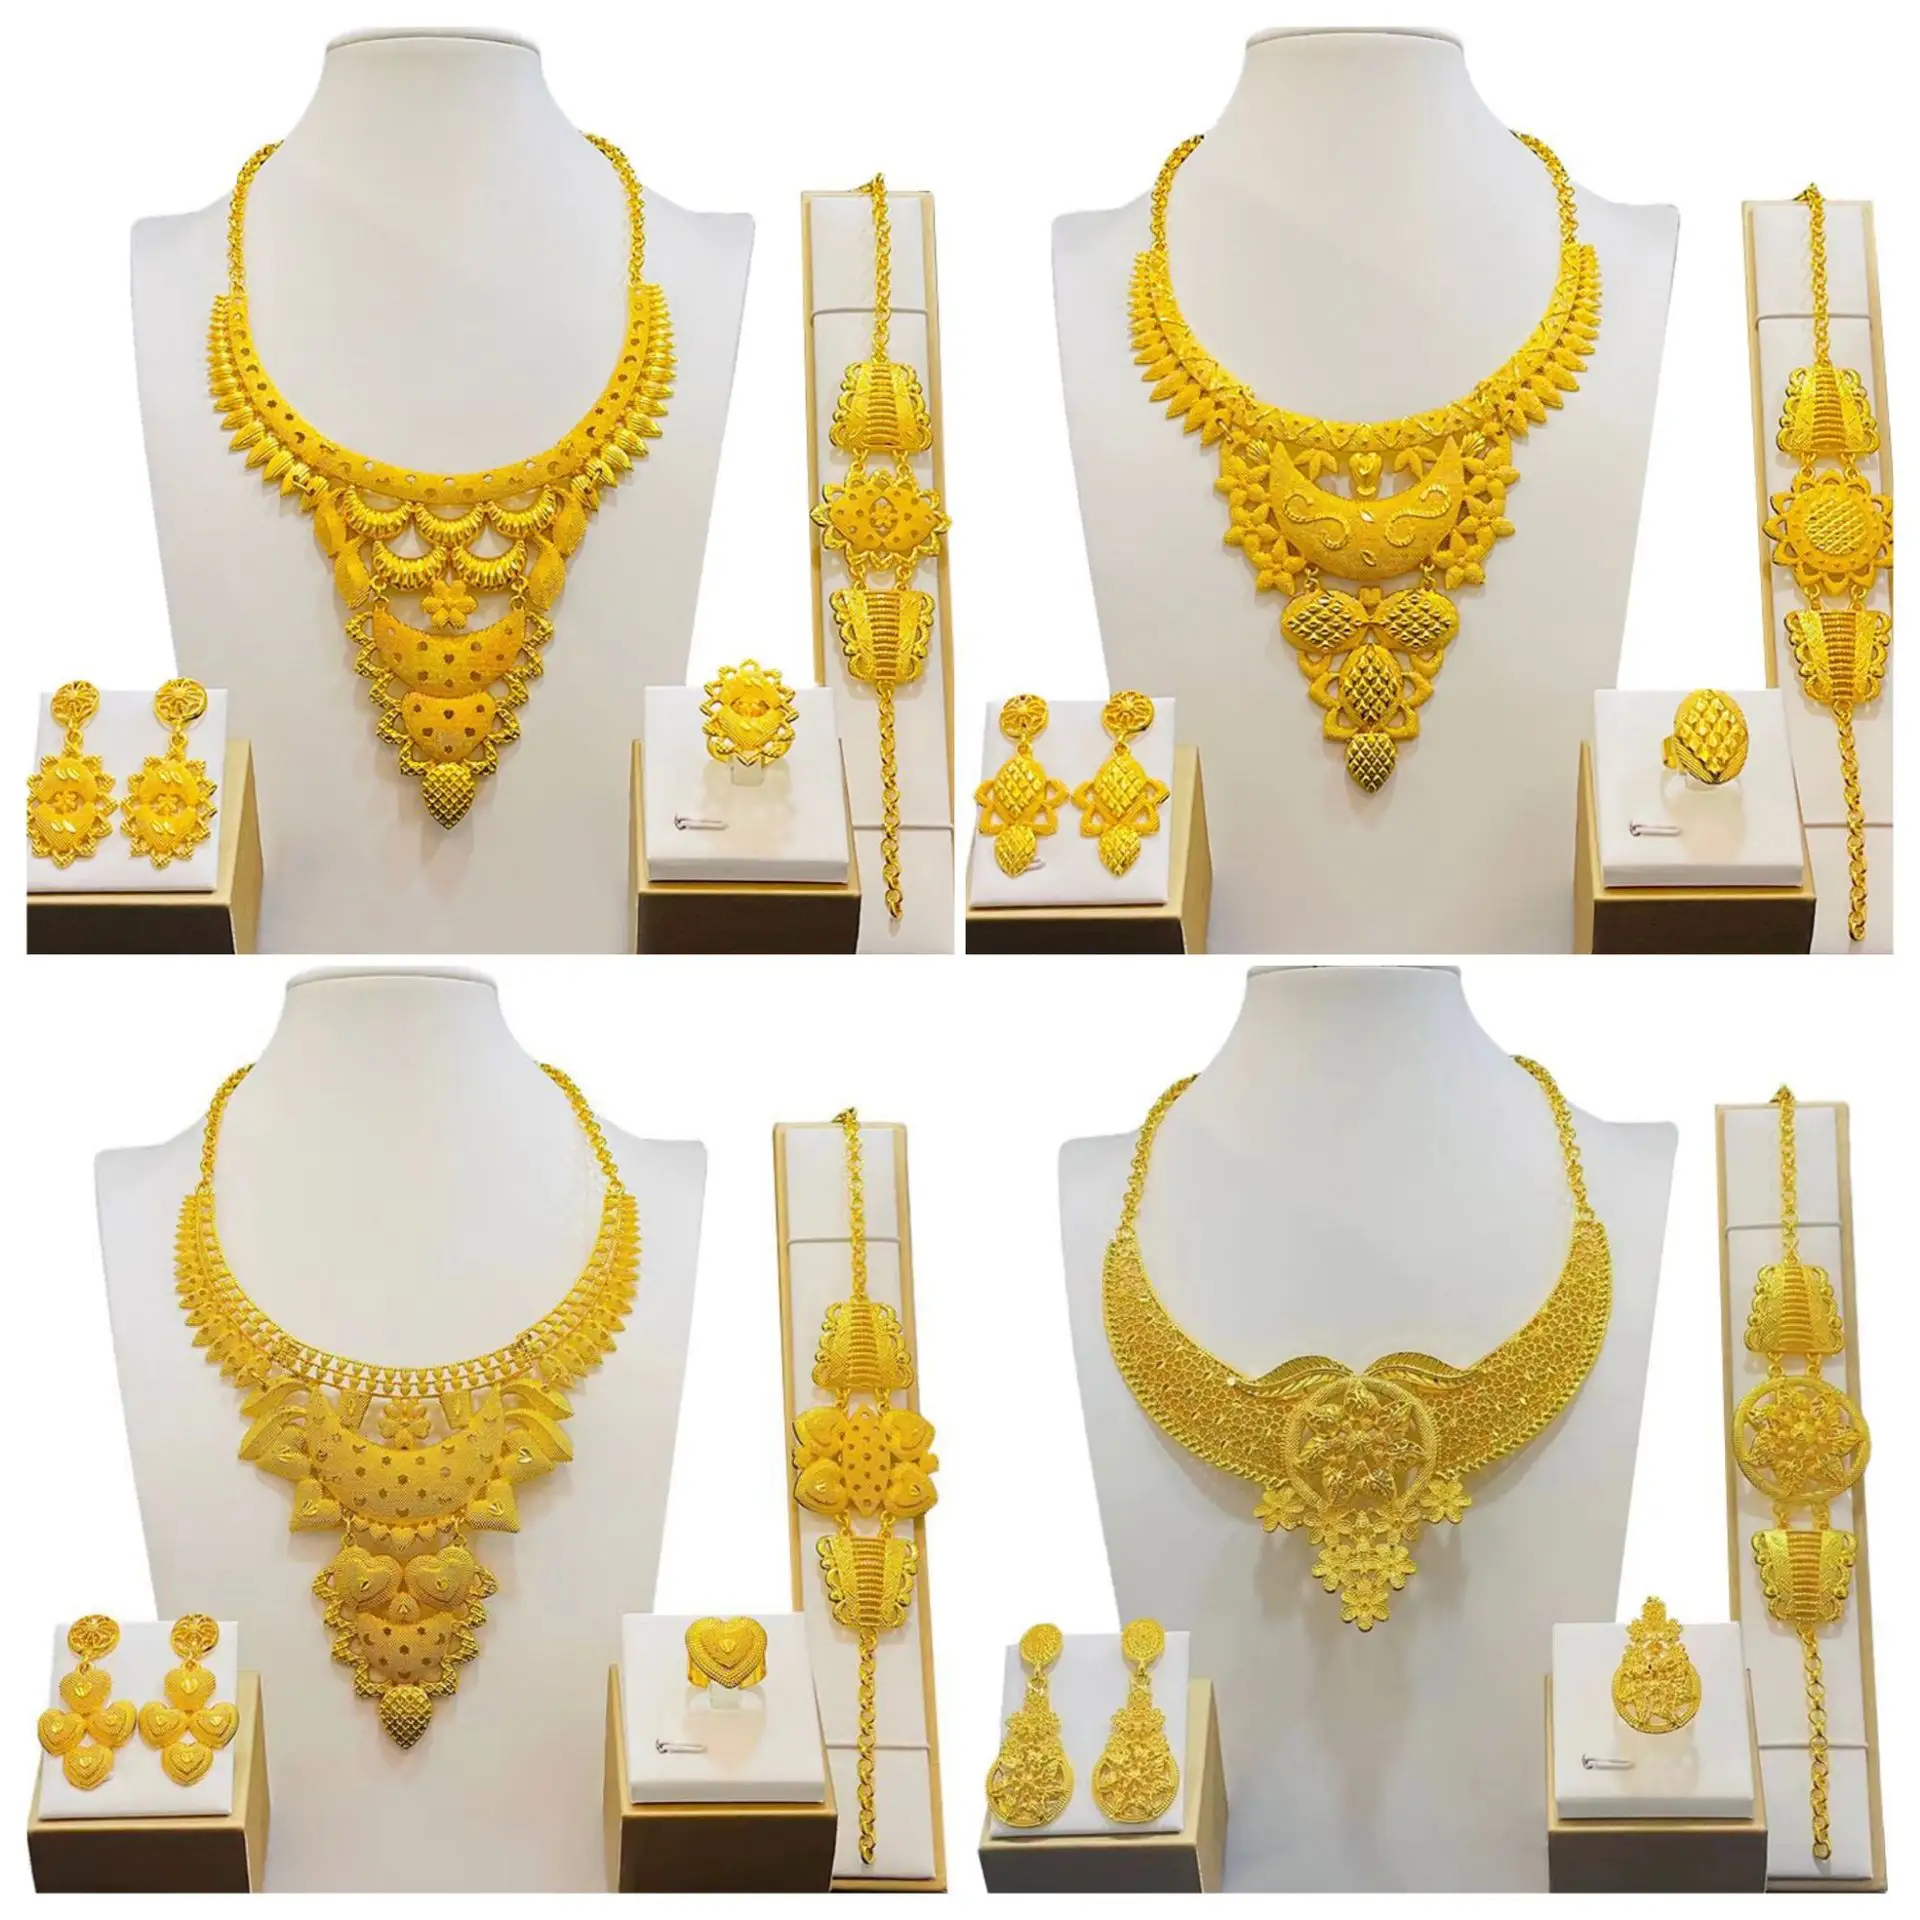 4pcsset necklace earrings bracelet ring high quality dubai 24k gold african style wedding big jewelry set for women